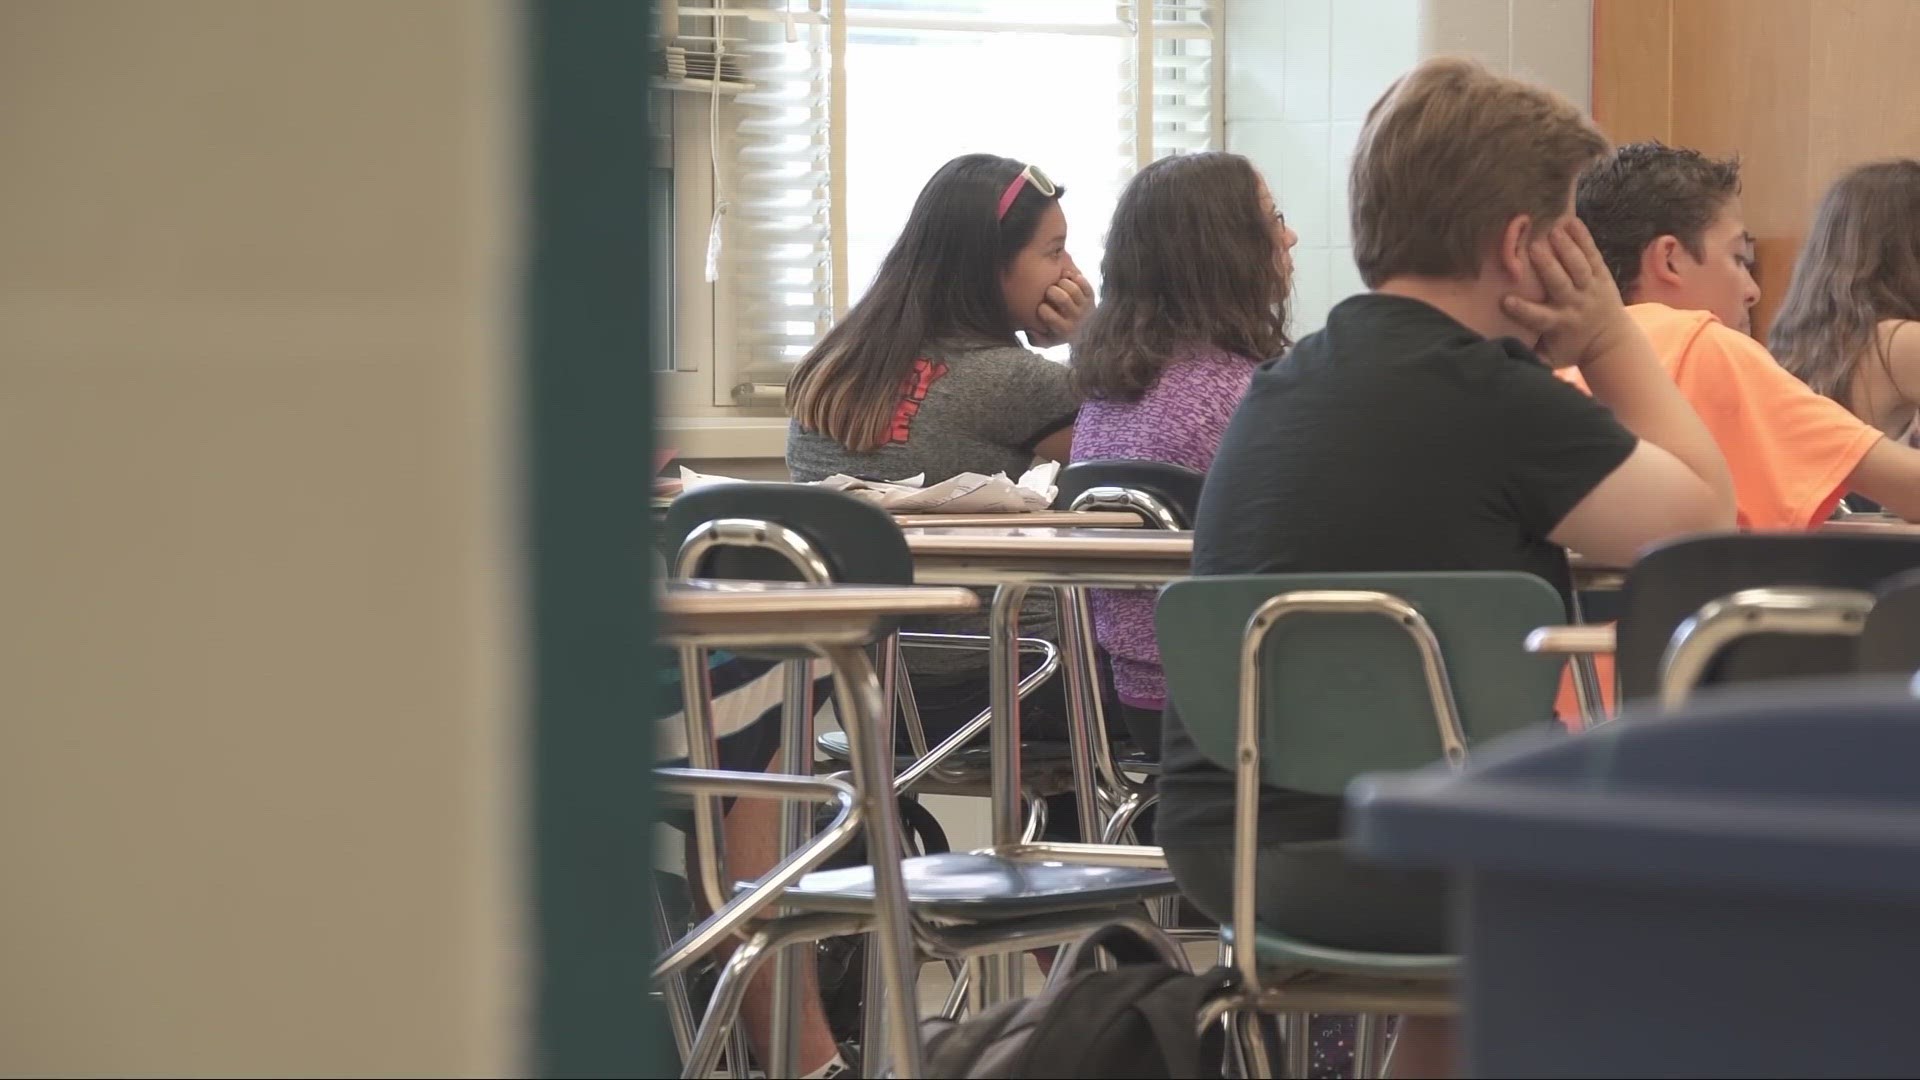 According to the Ohio Department of Education, this is the first year districts and schools will receive overall ratings in half-star increments.